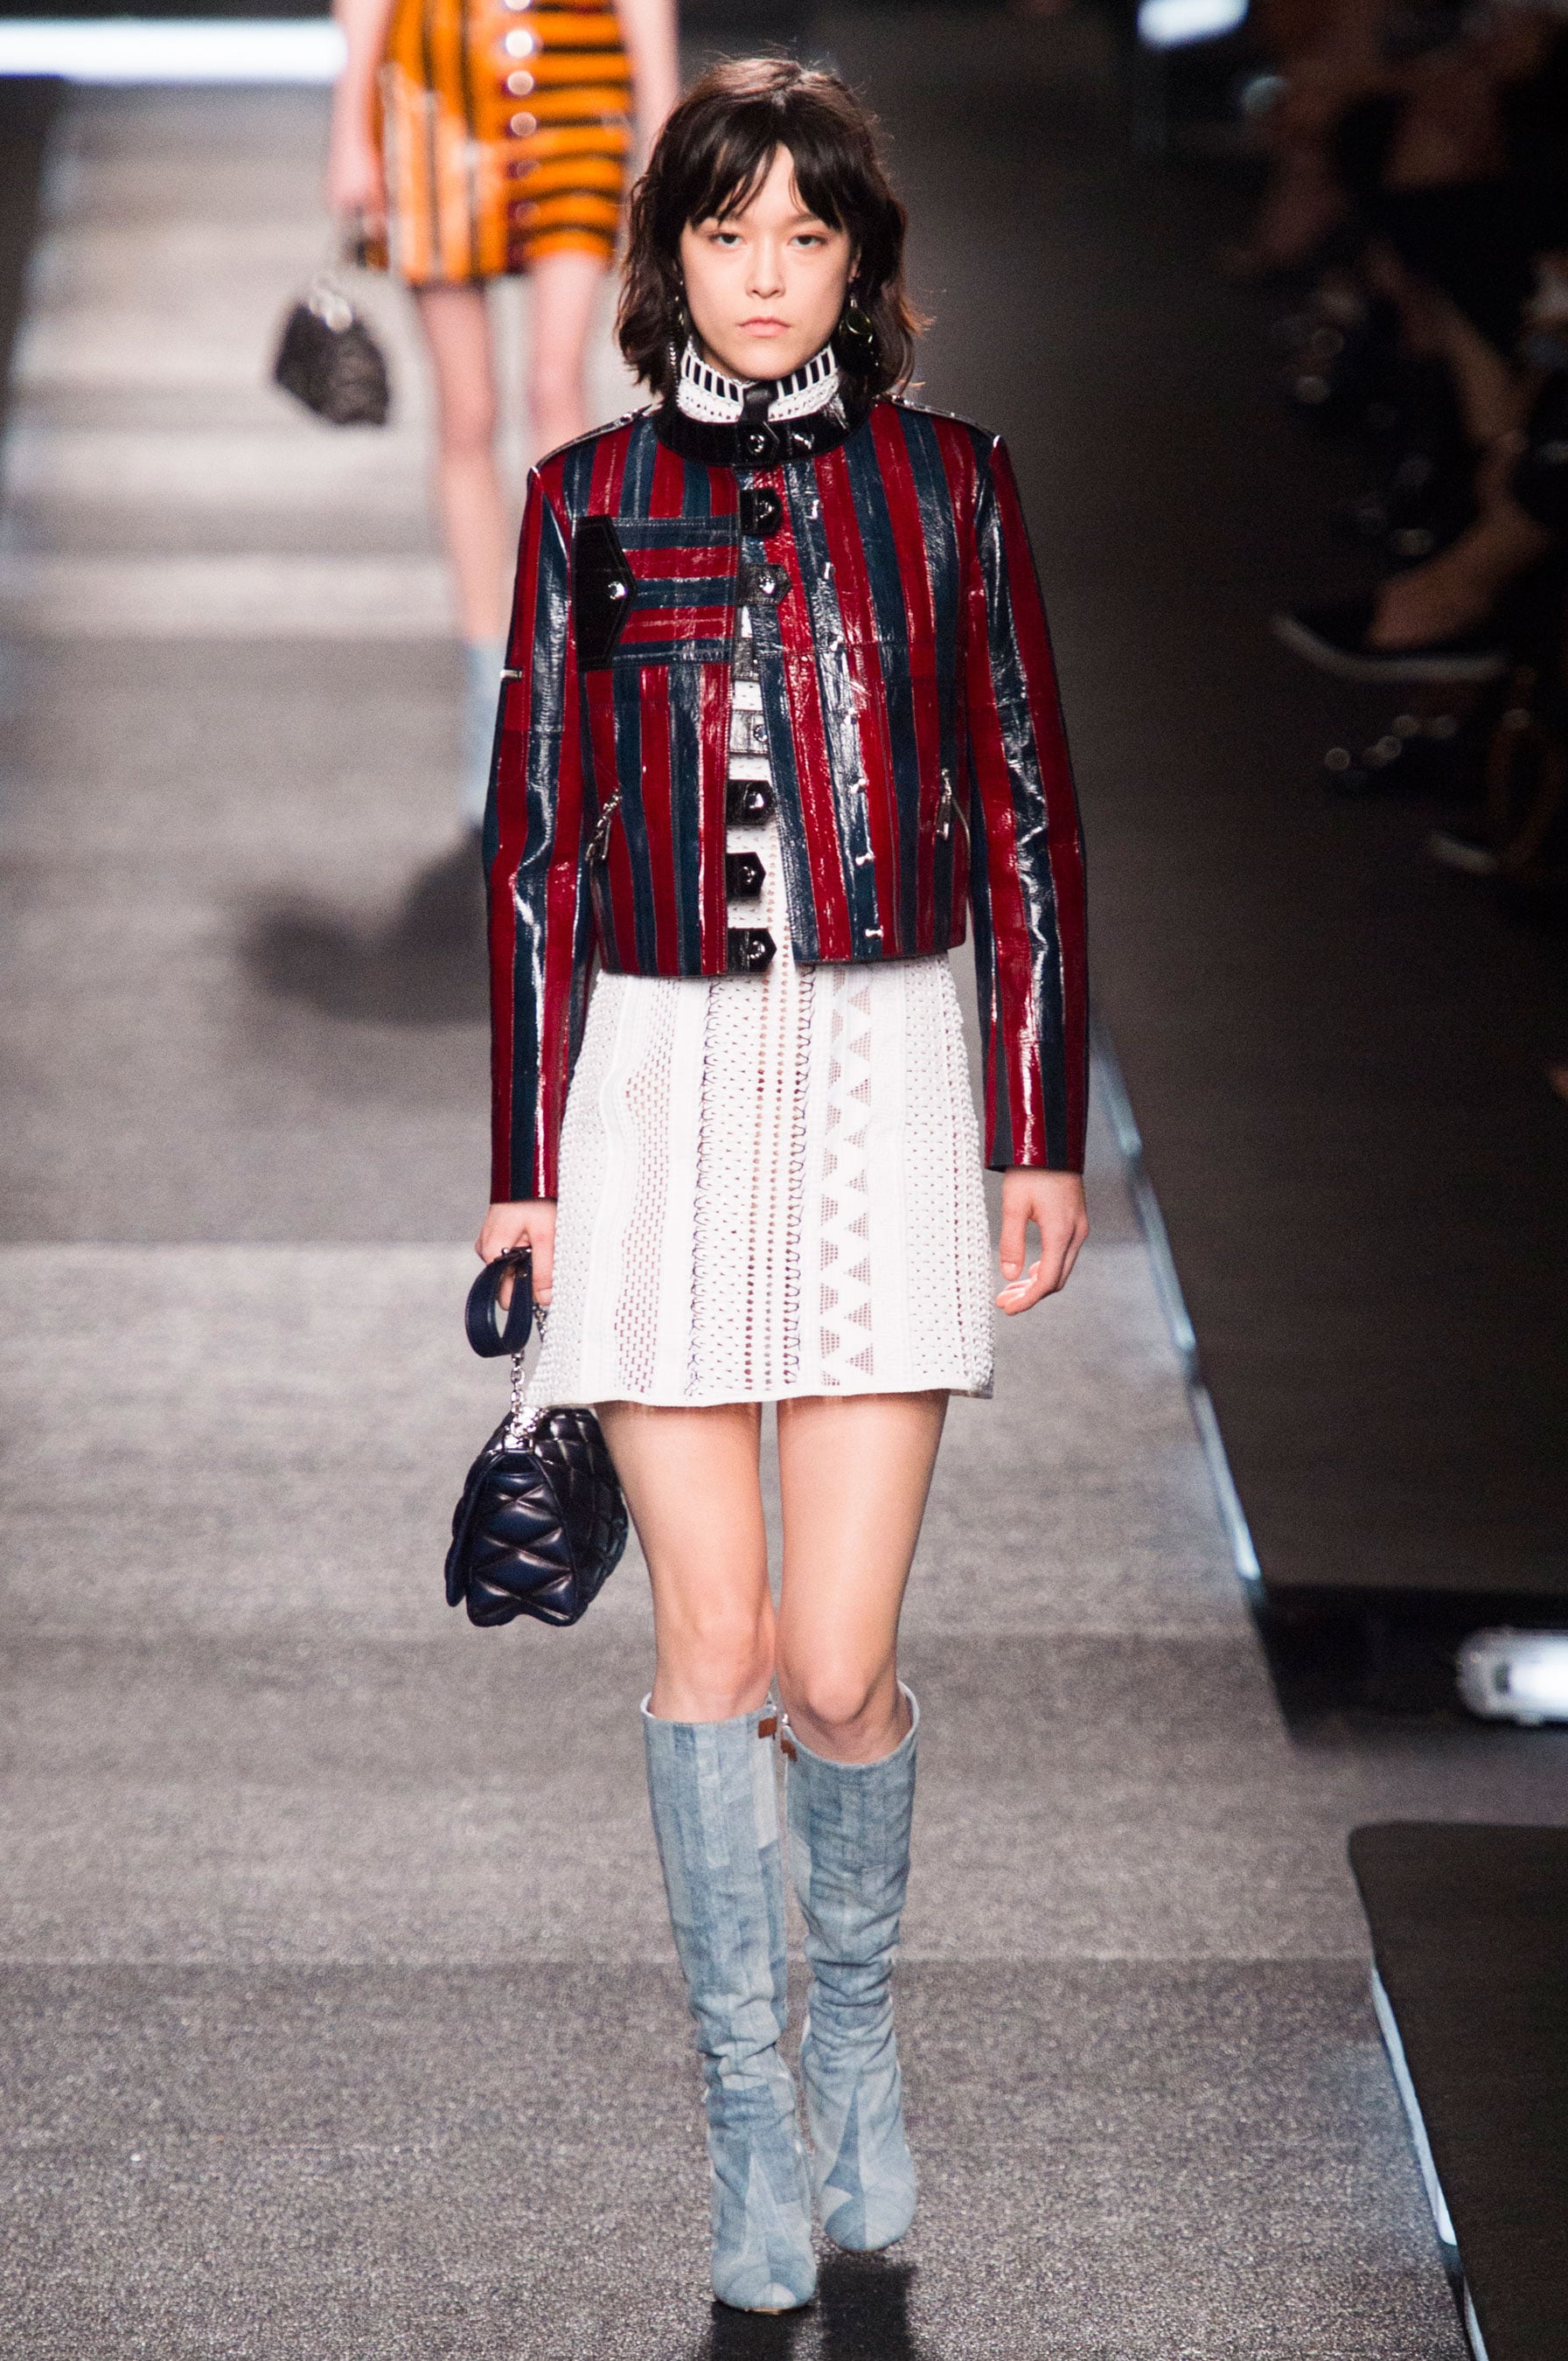 Louis Vuitton Spring 2015  The 10 Runway Trends You'll Be Wearing